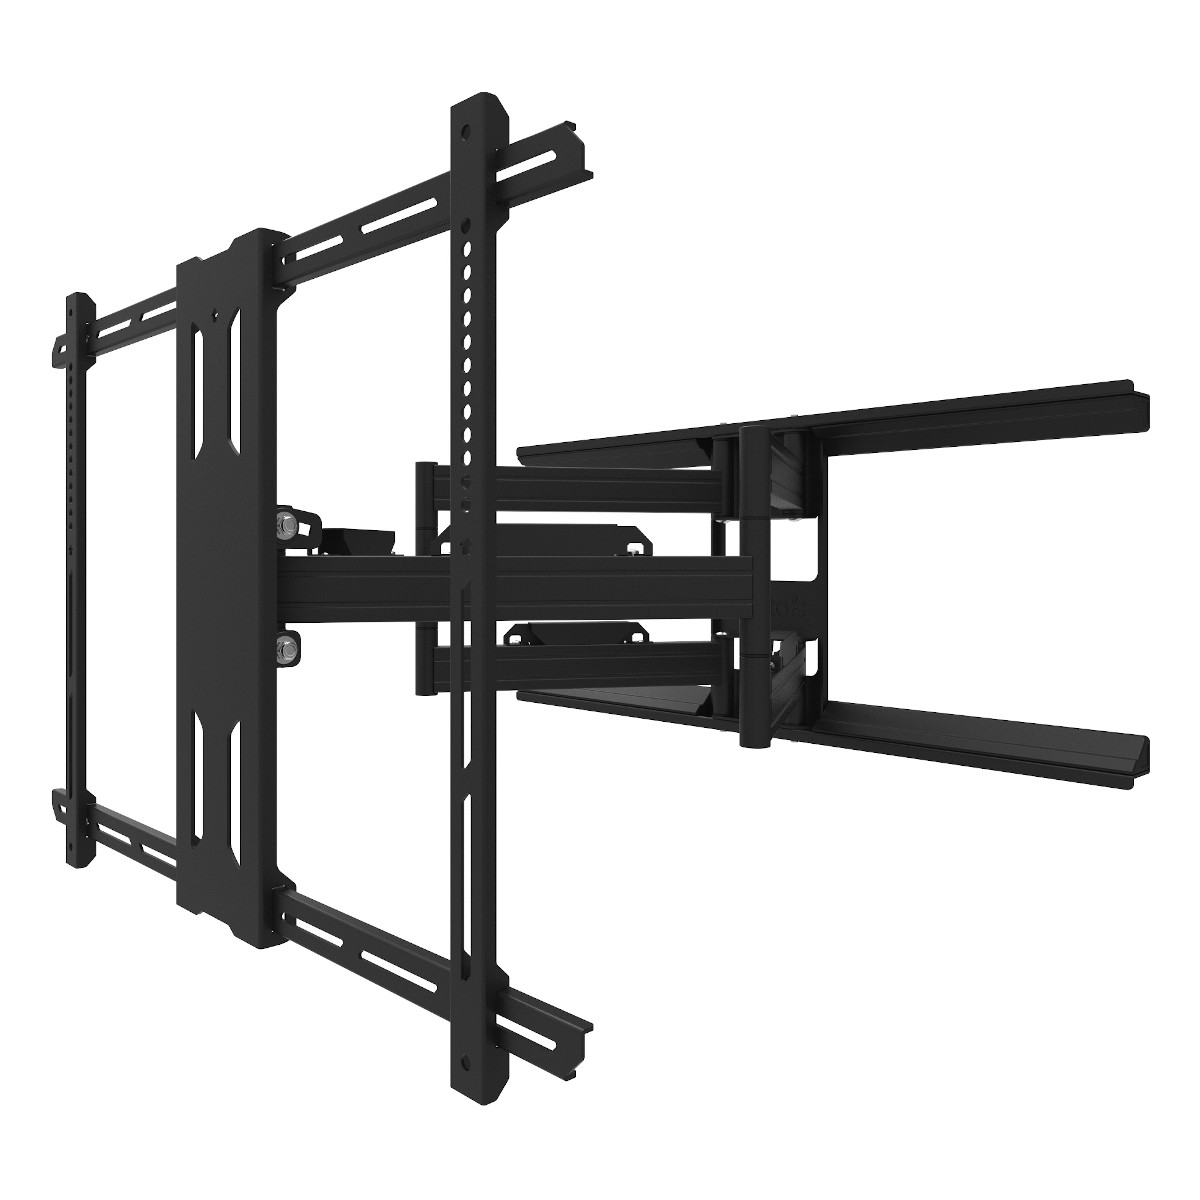 Kanto PDX700G Articulating Full Motion Outdoor Galvanized TV Mount for 42" - 100" TV - image 1 of 8